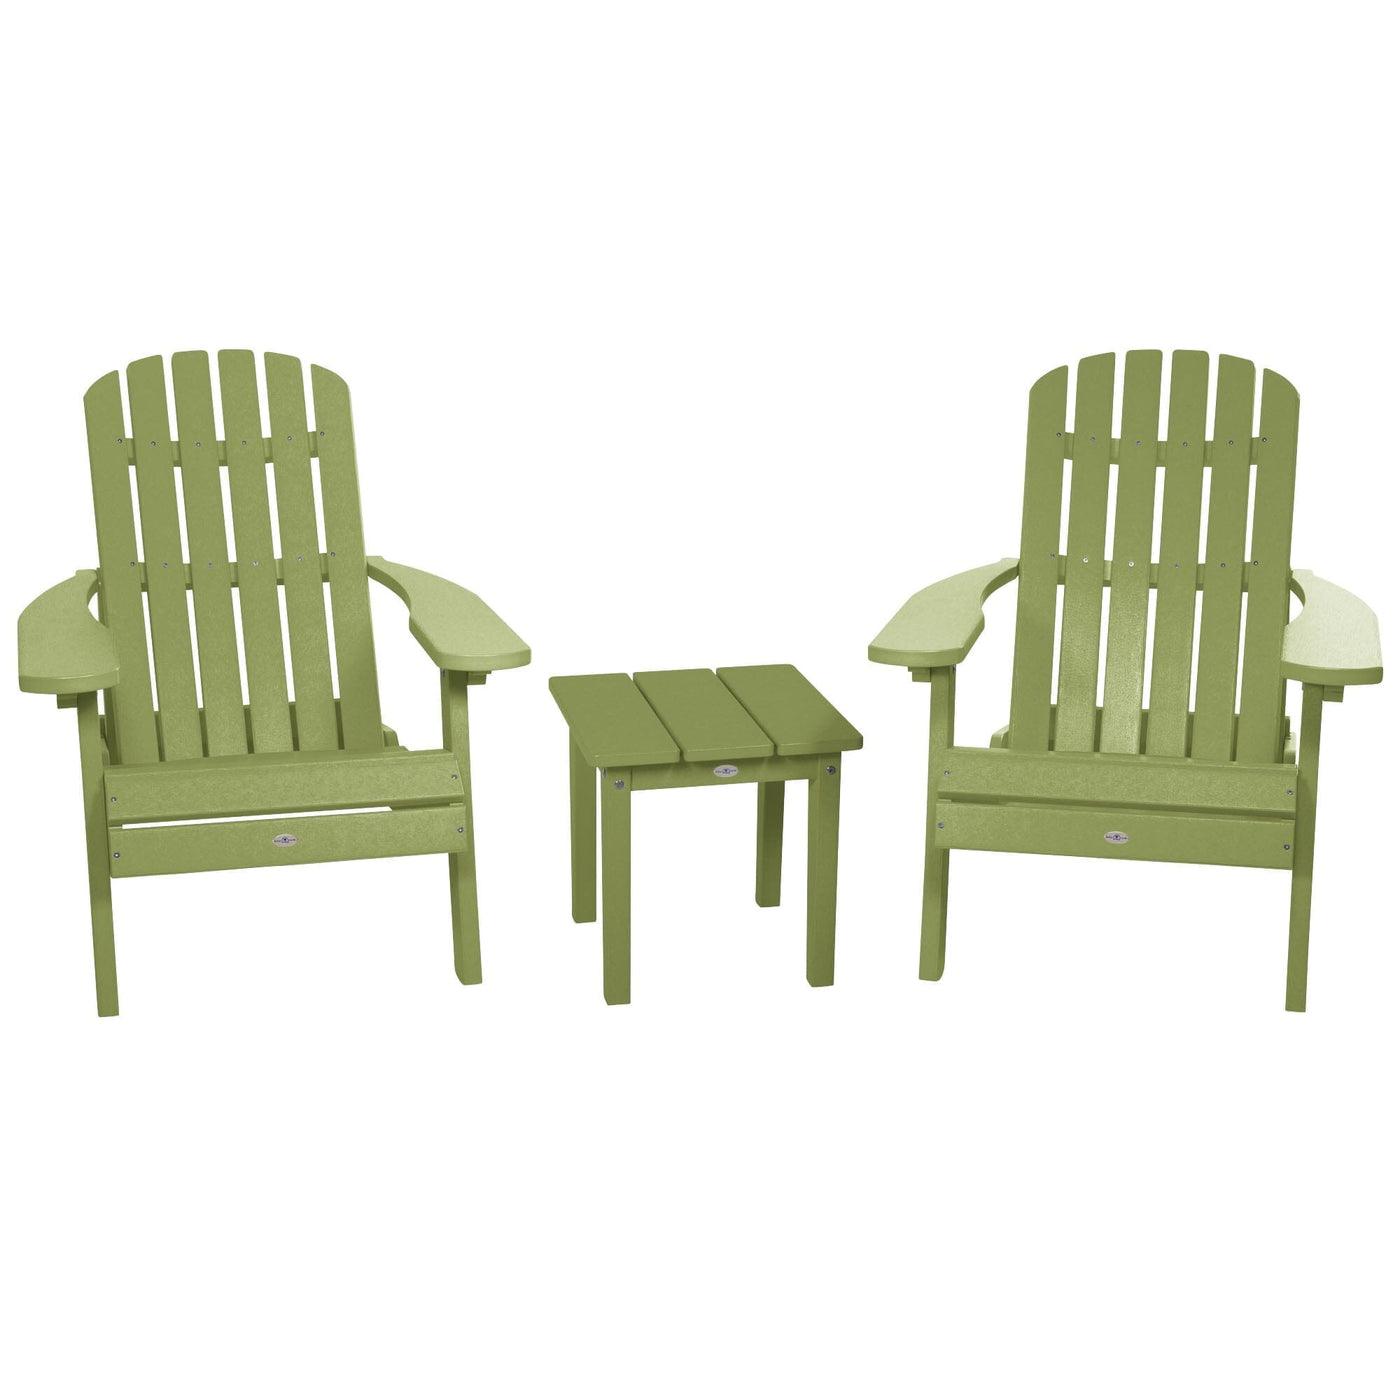 Two Cape Folding Adirondack Chairs and Side Table Set Kitted Set Bahia Verde Outdoors Palm Green 